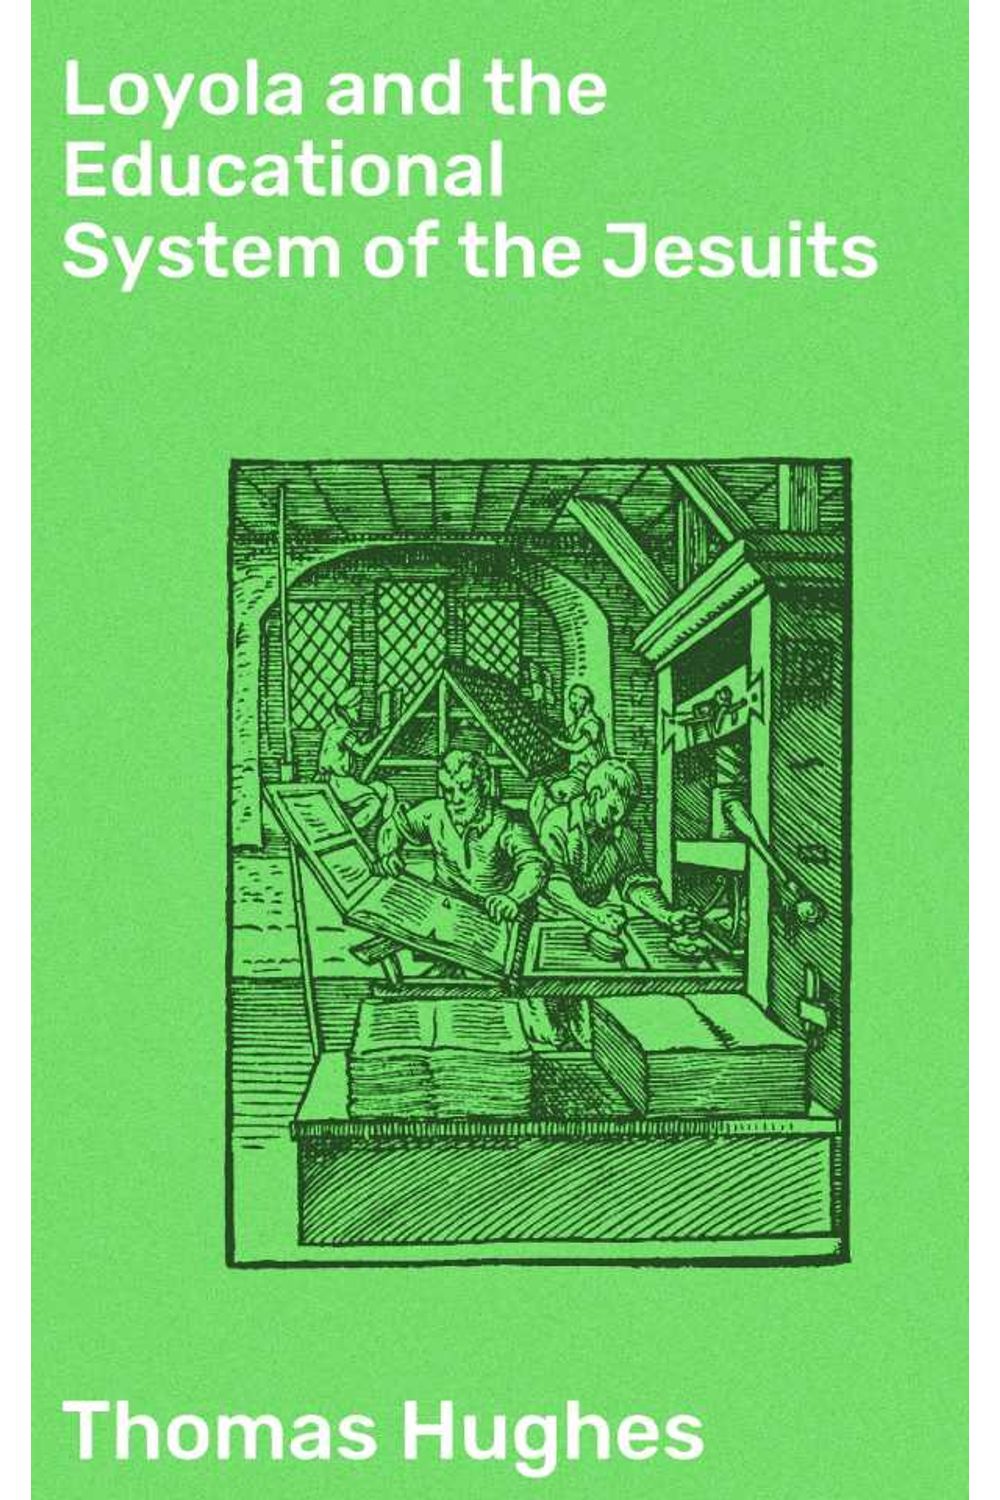 bw-loyola-and-the-educational-system-of-the-jesuits-good-press-4064066234423